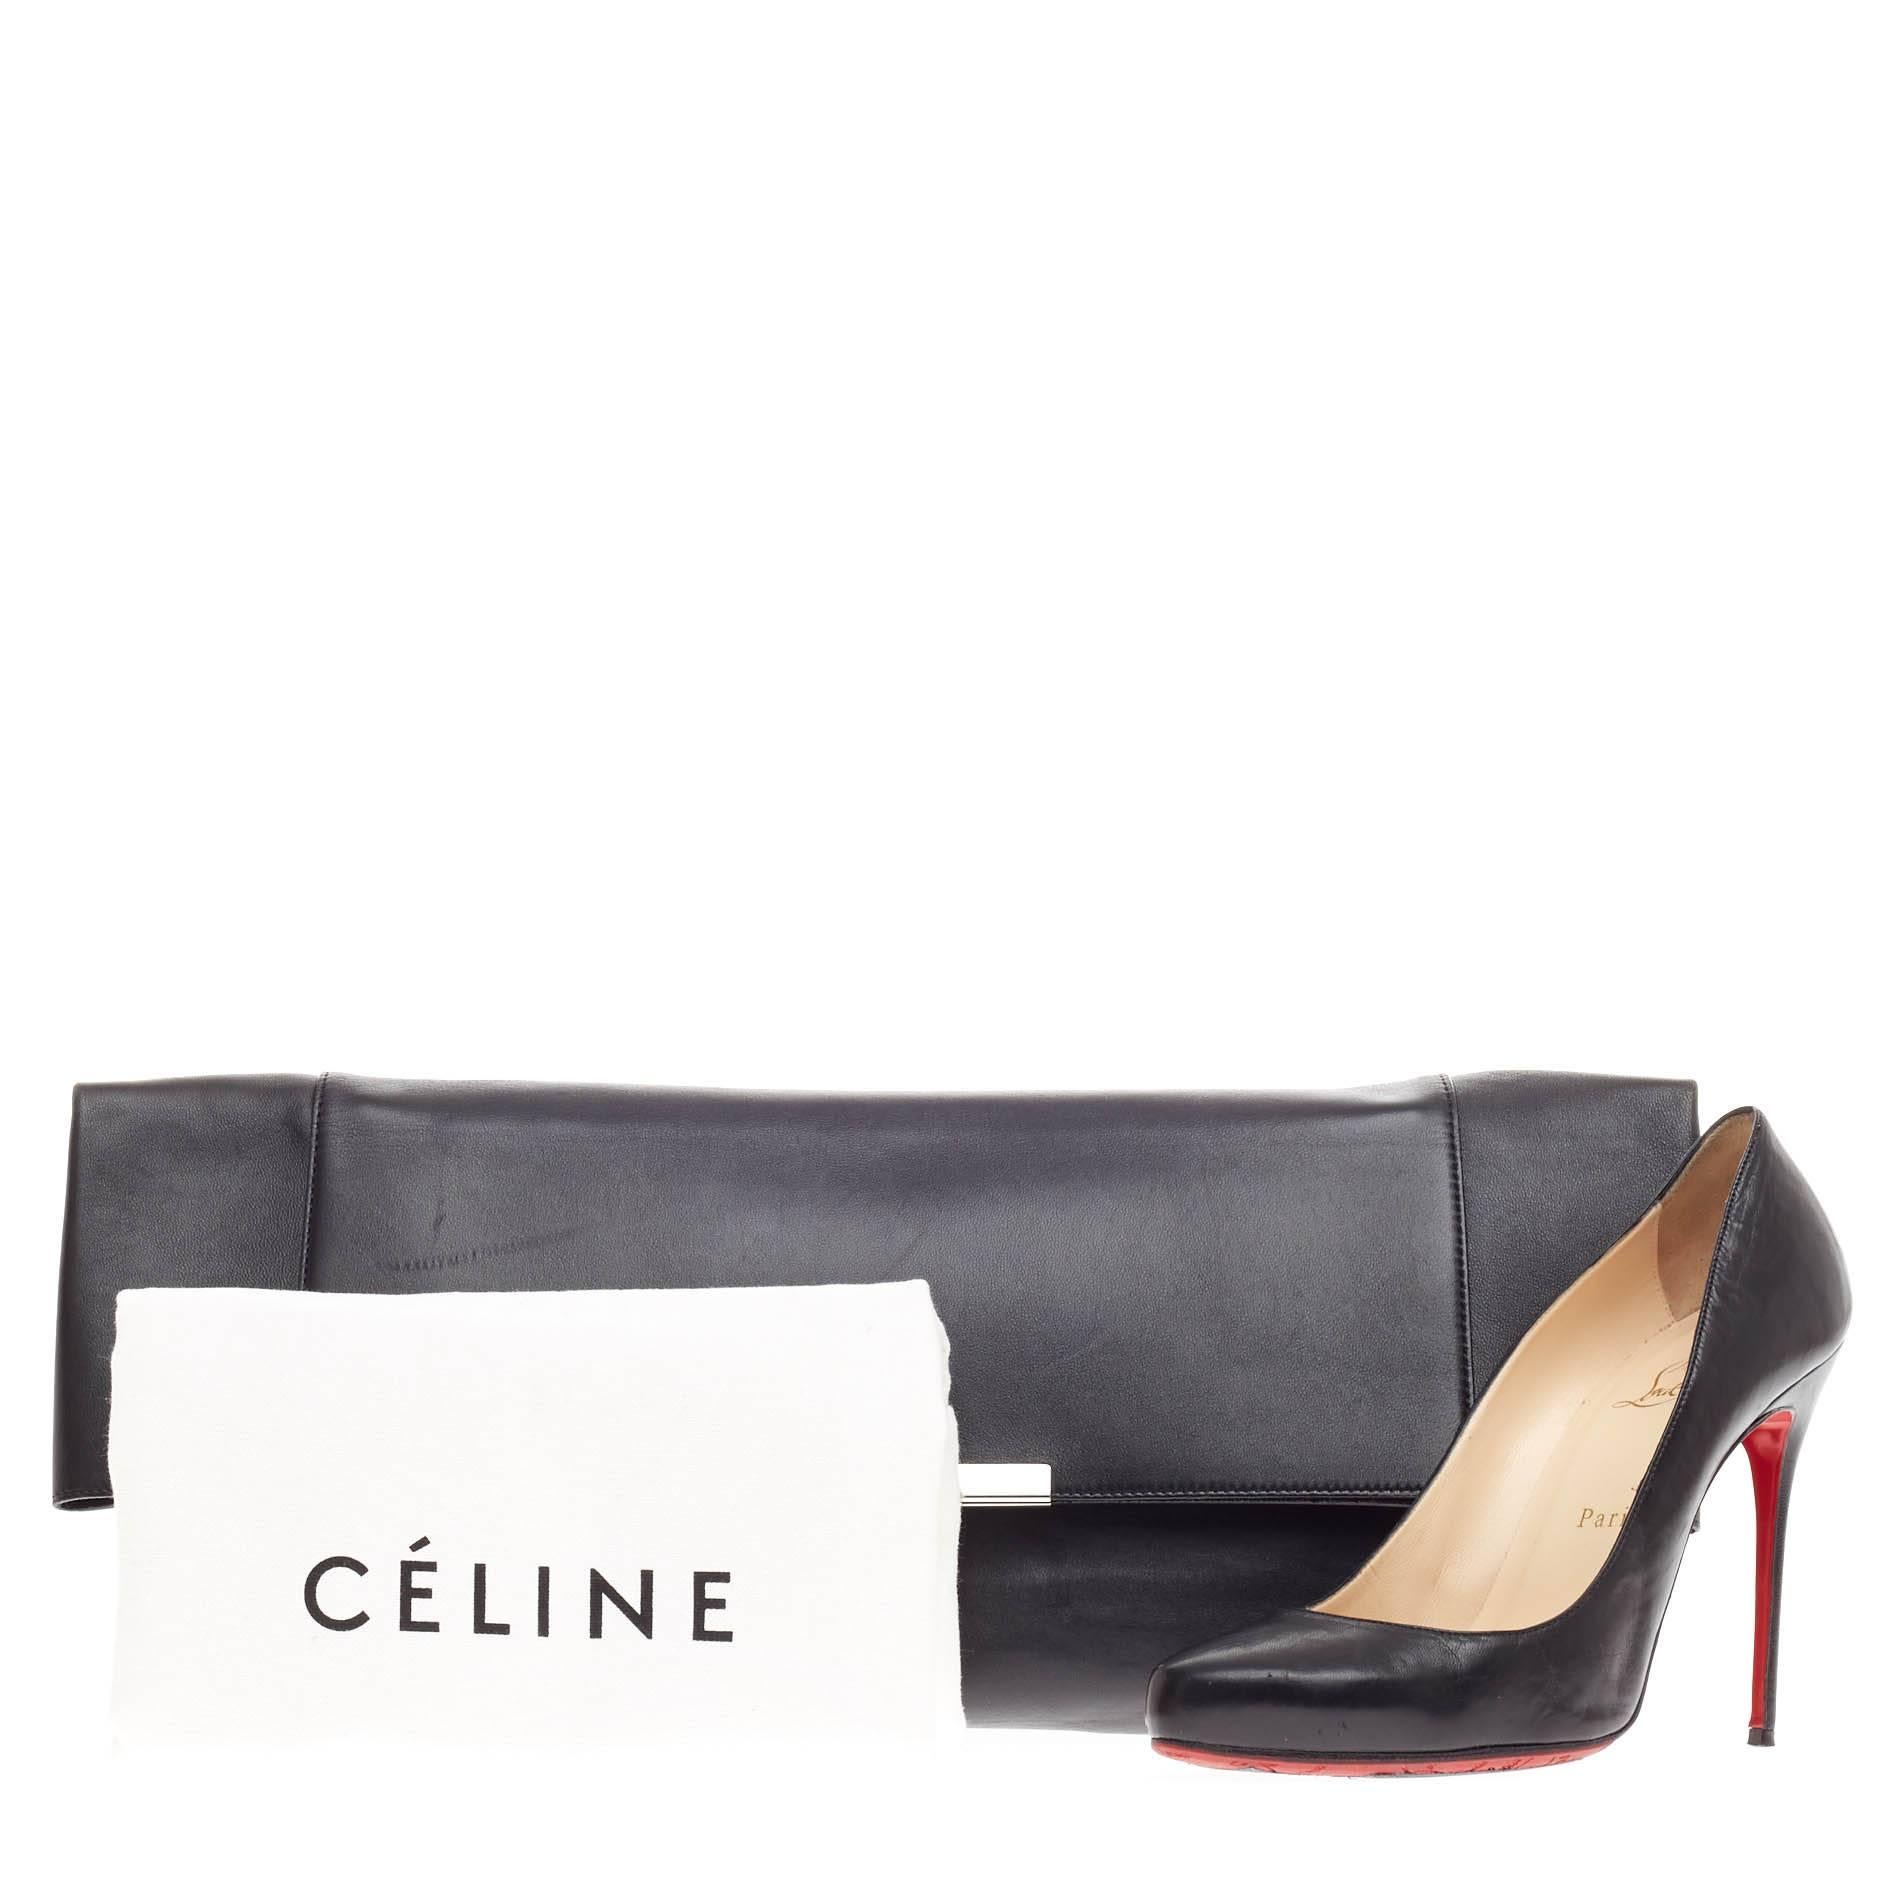 This authentic Celine Folded Clutch Leather Large presented in the brand's Fall/Winter 2012 Collection is perfect for day to night outs. Crafted in smooth black calfskin leather, this oversized, tailored folded clutch features a Celine stamped logo